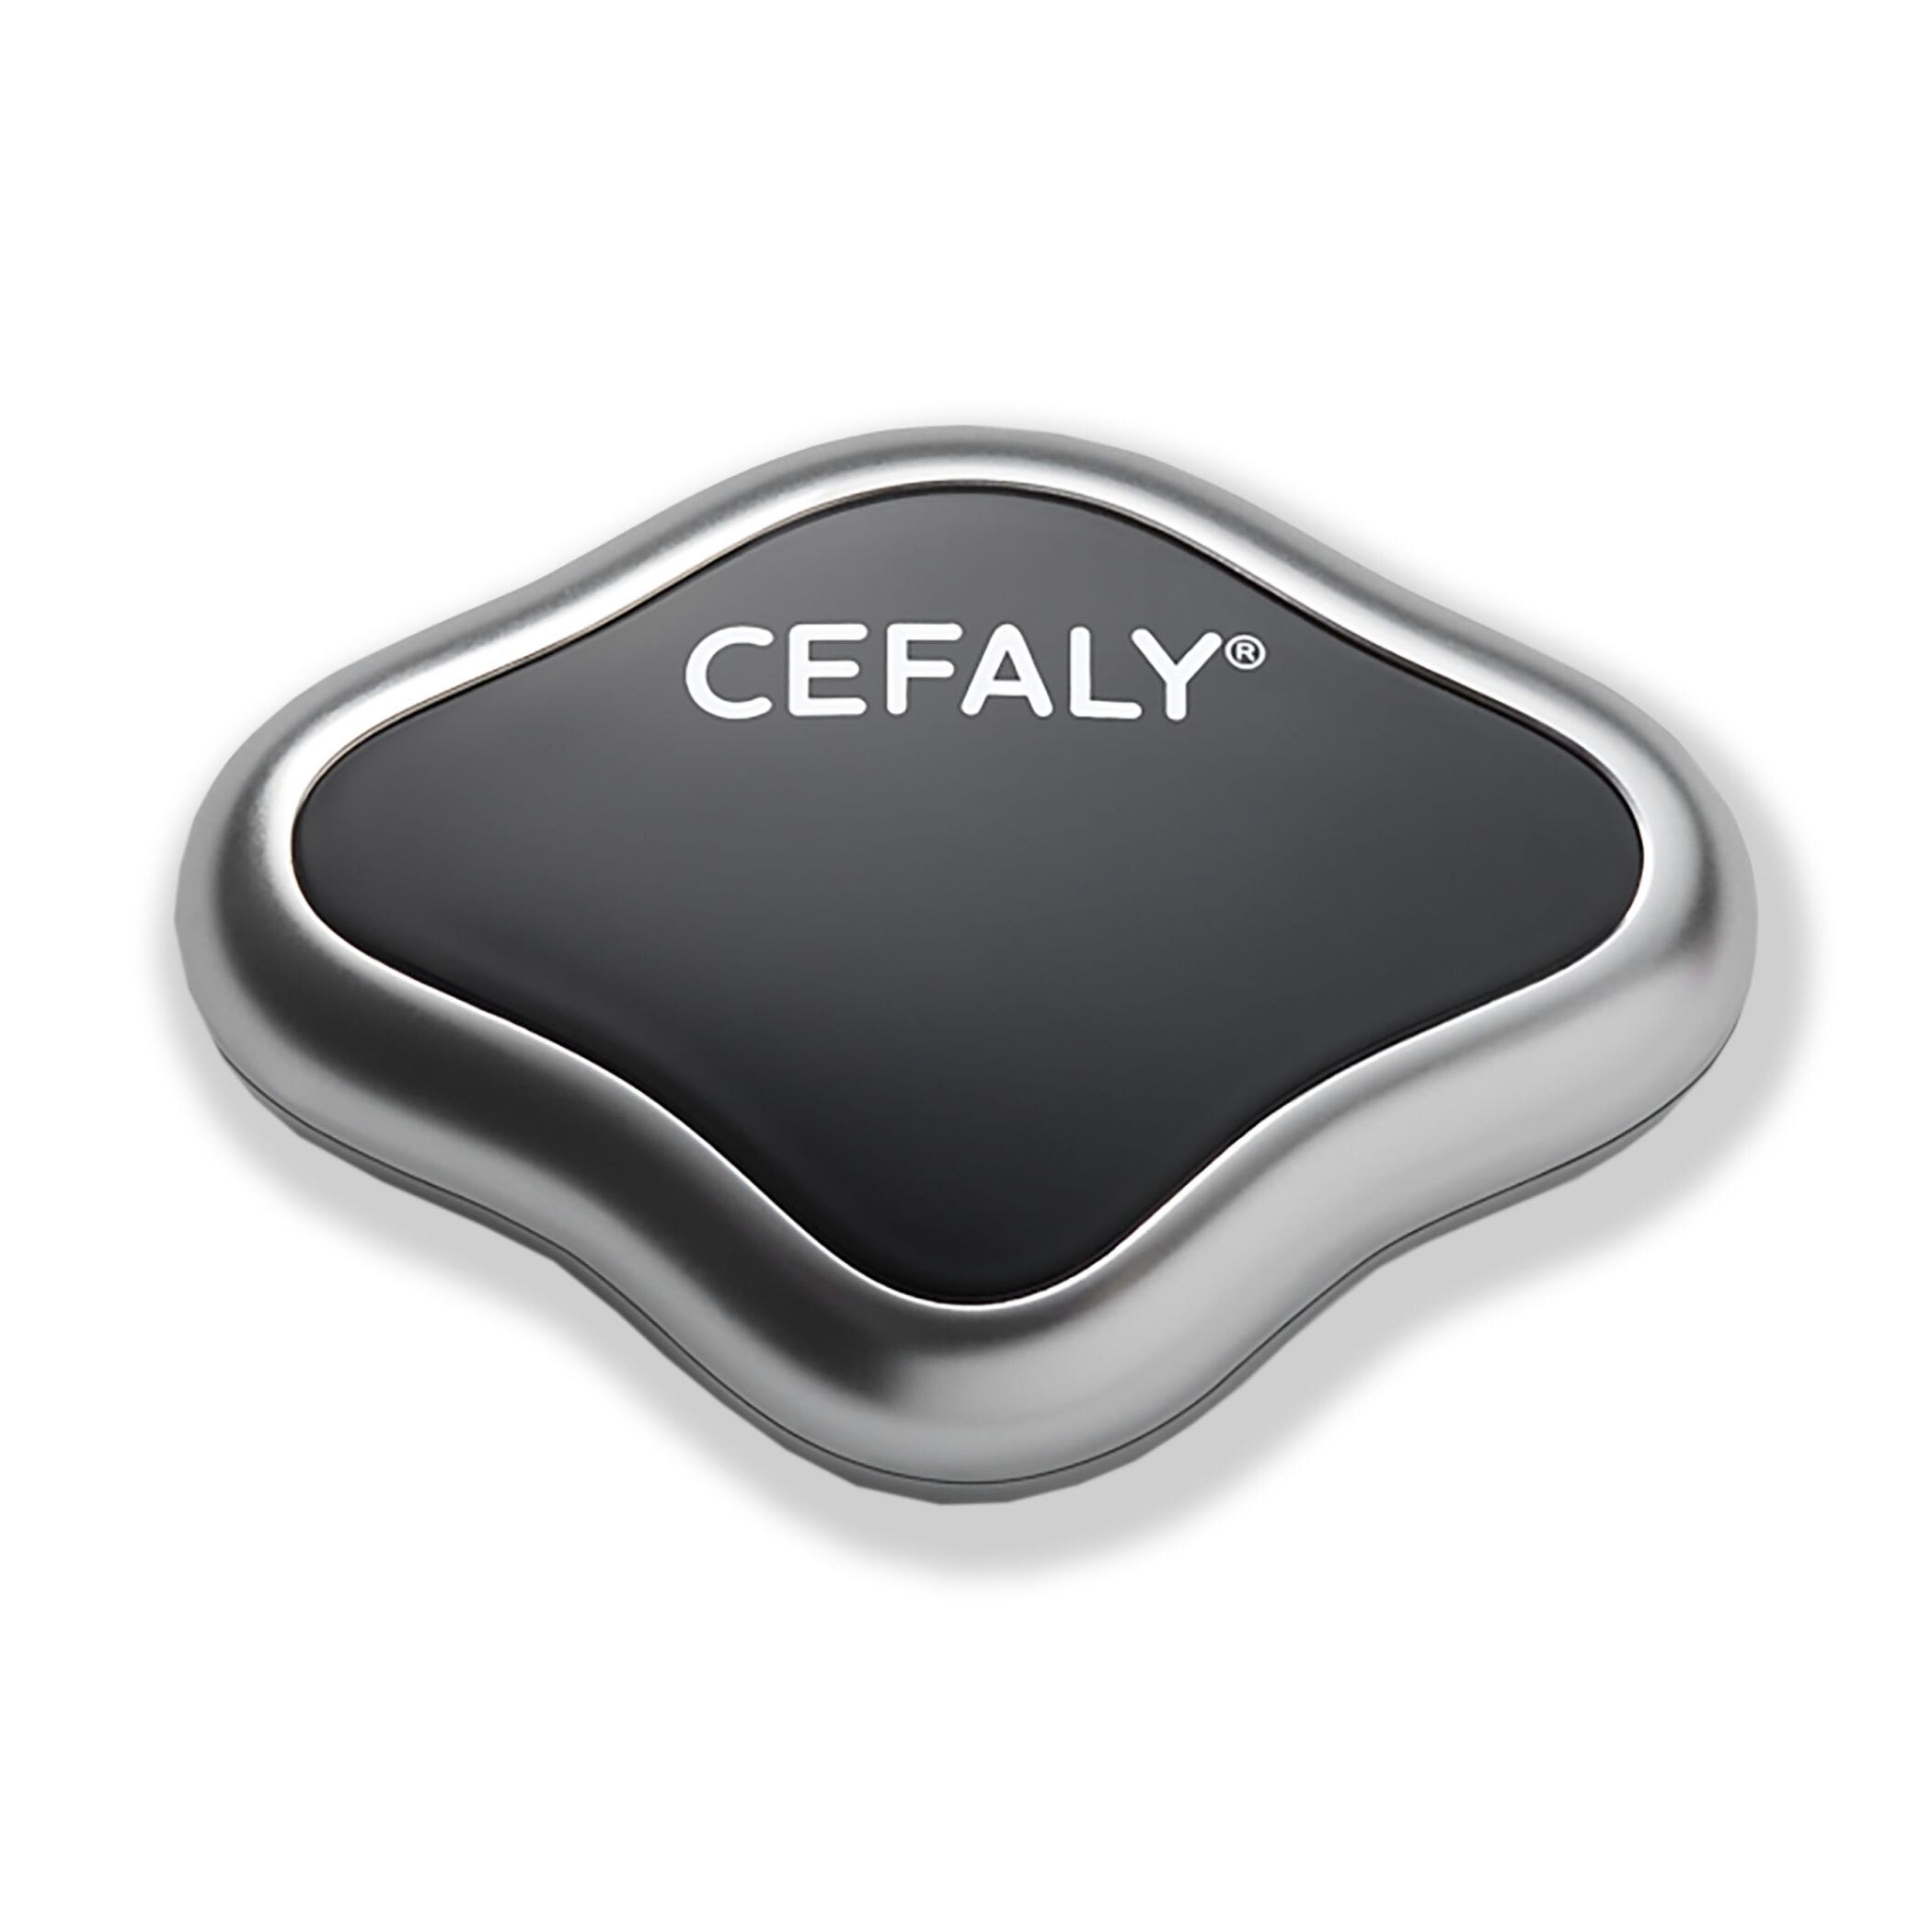  Cefaly Migraine treatment and prevention device with electrode laid out on work desk  11